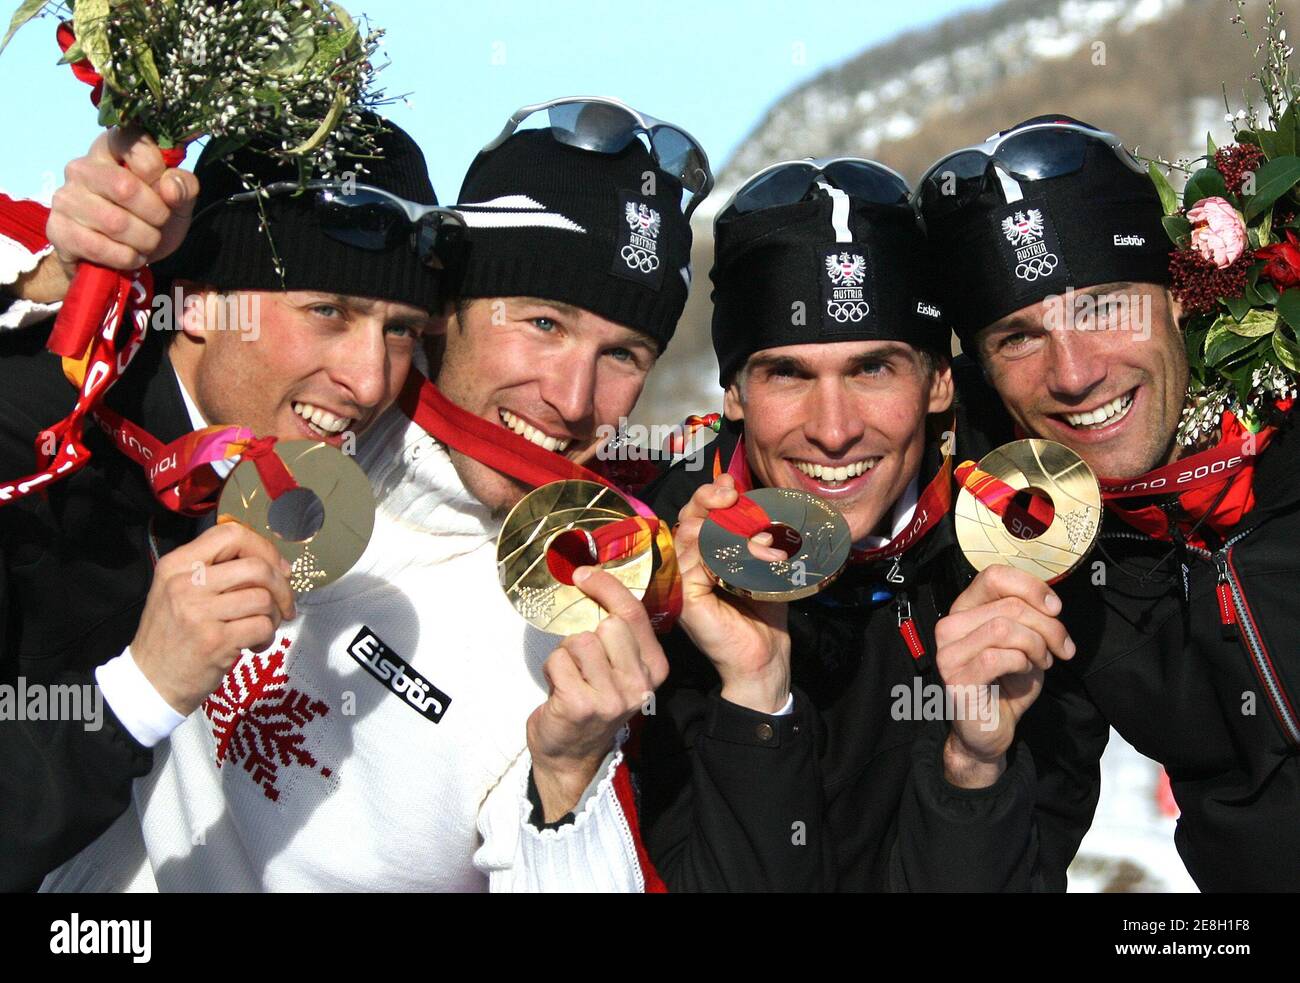 Austria's Mario Stecher, Christoph Bieler, Felix Gottwald and Michael Gruber (L-R) present their gold medals after winning the Nordic combined team competition at the Torino 2006 Winter Olympic Games in Pragelato, Italy, February 16, 2006. Austria won the competition ahead of Germany and Finland.  REUTERS/Pascal Lauener Stock Photo